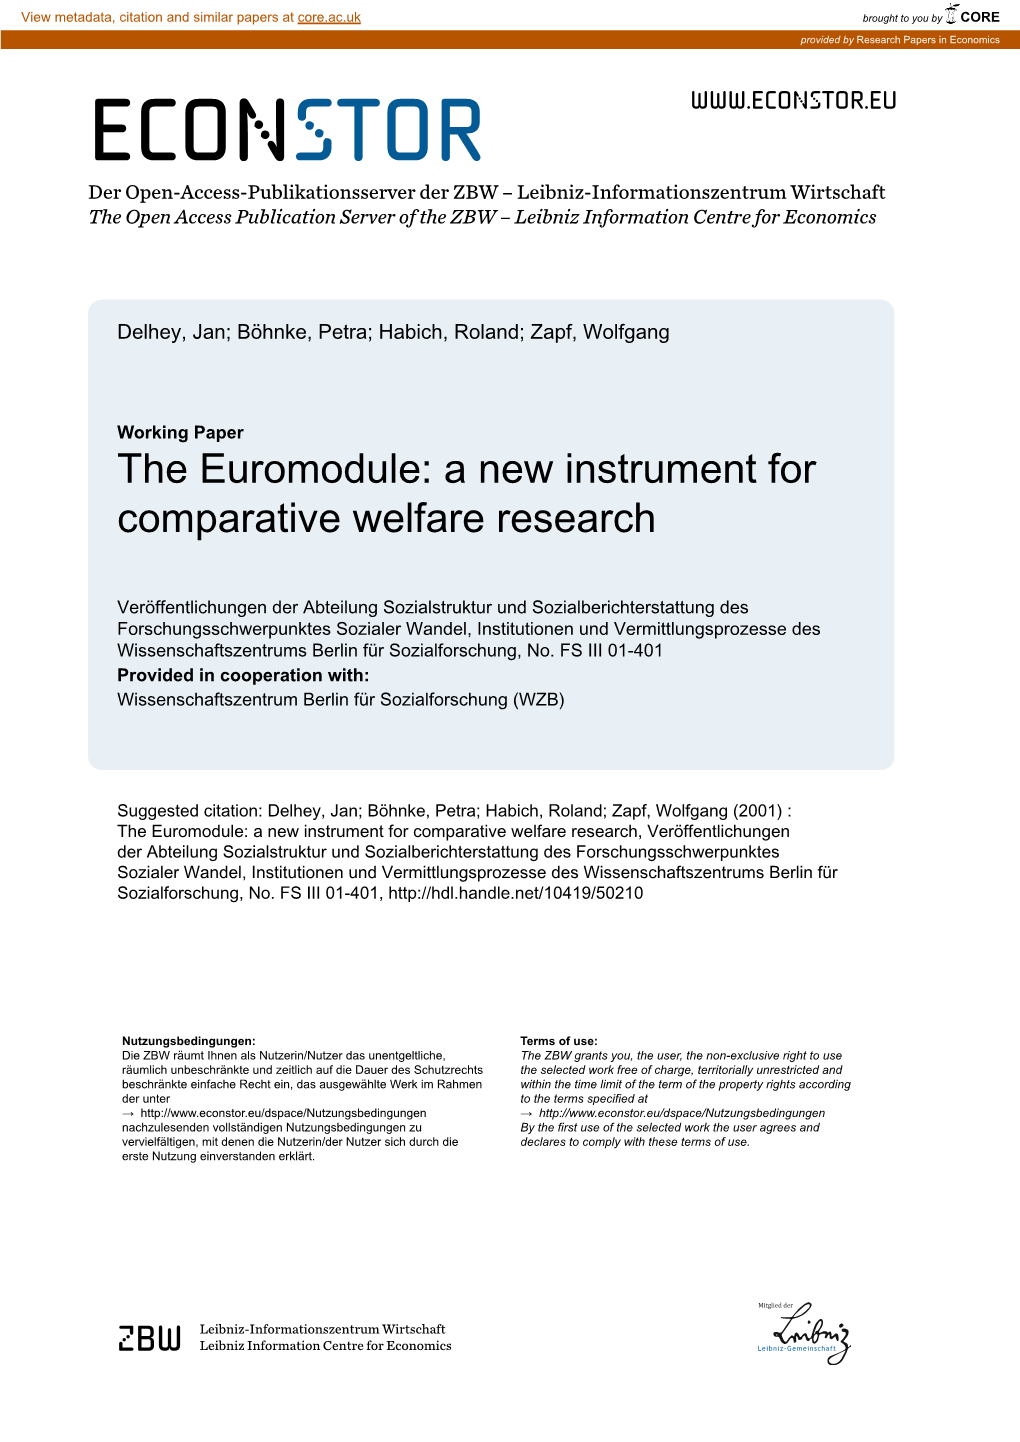 The Euromodule. a New Instrument for Comparative Welfare Research